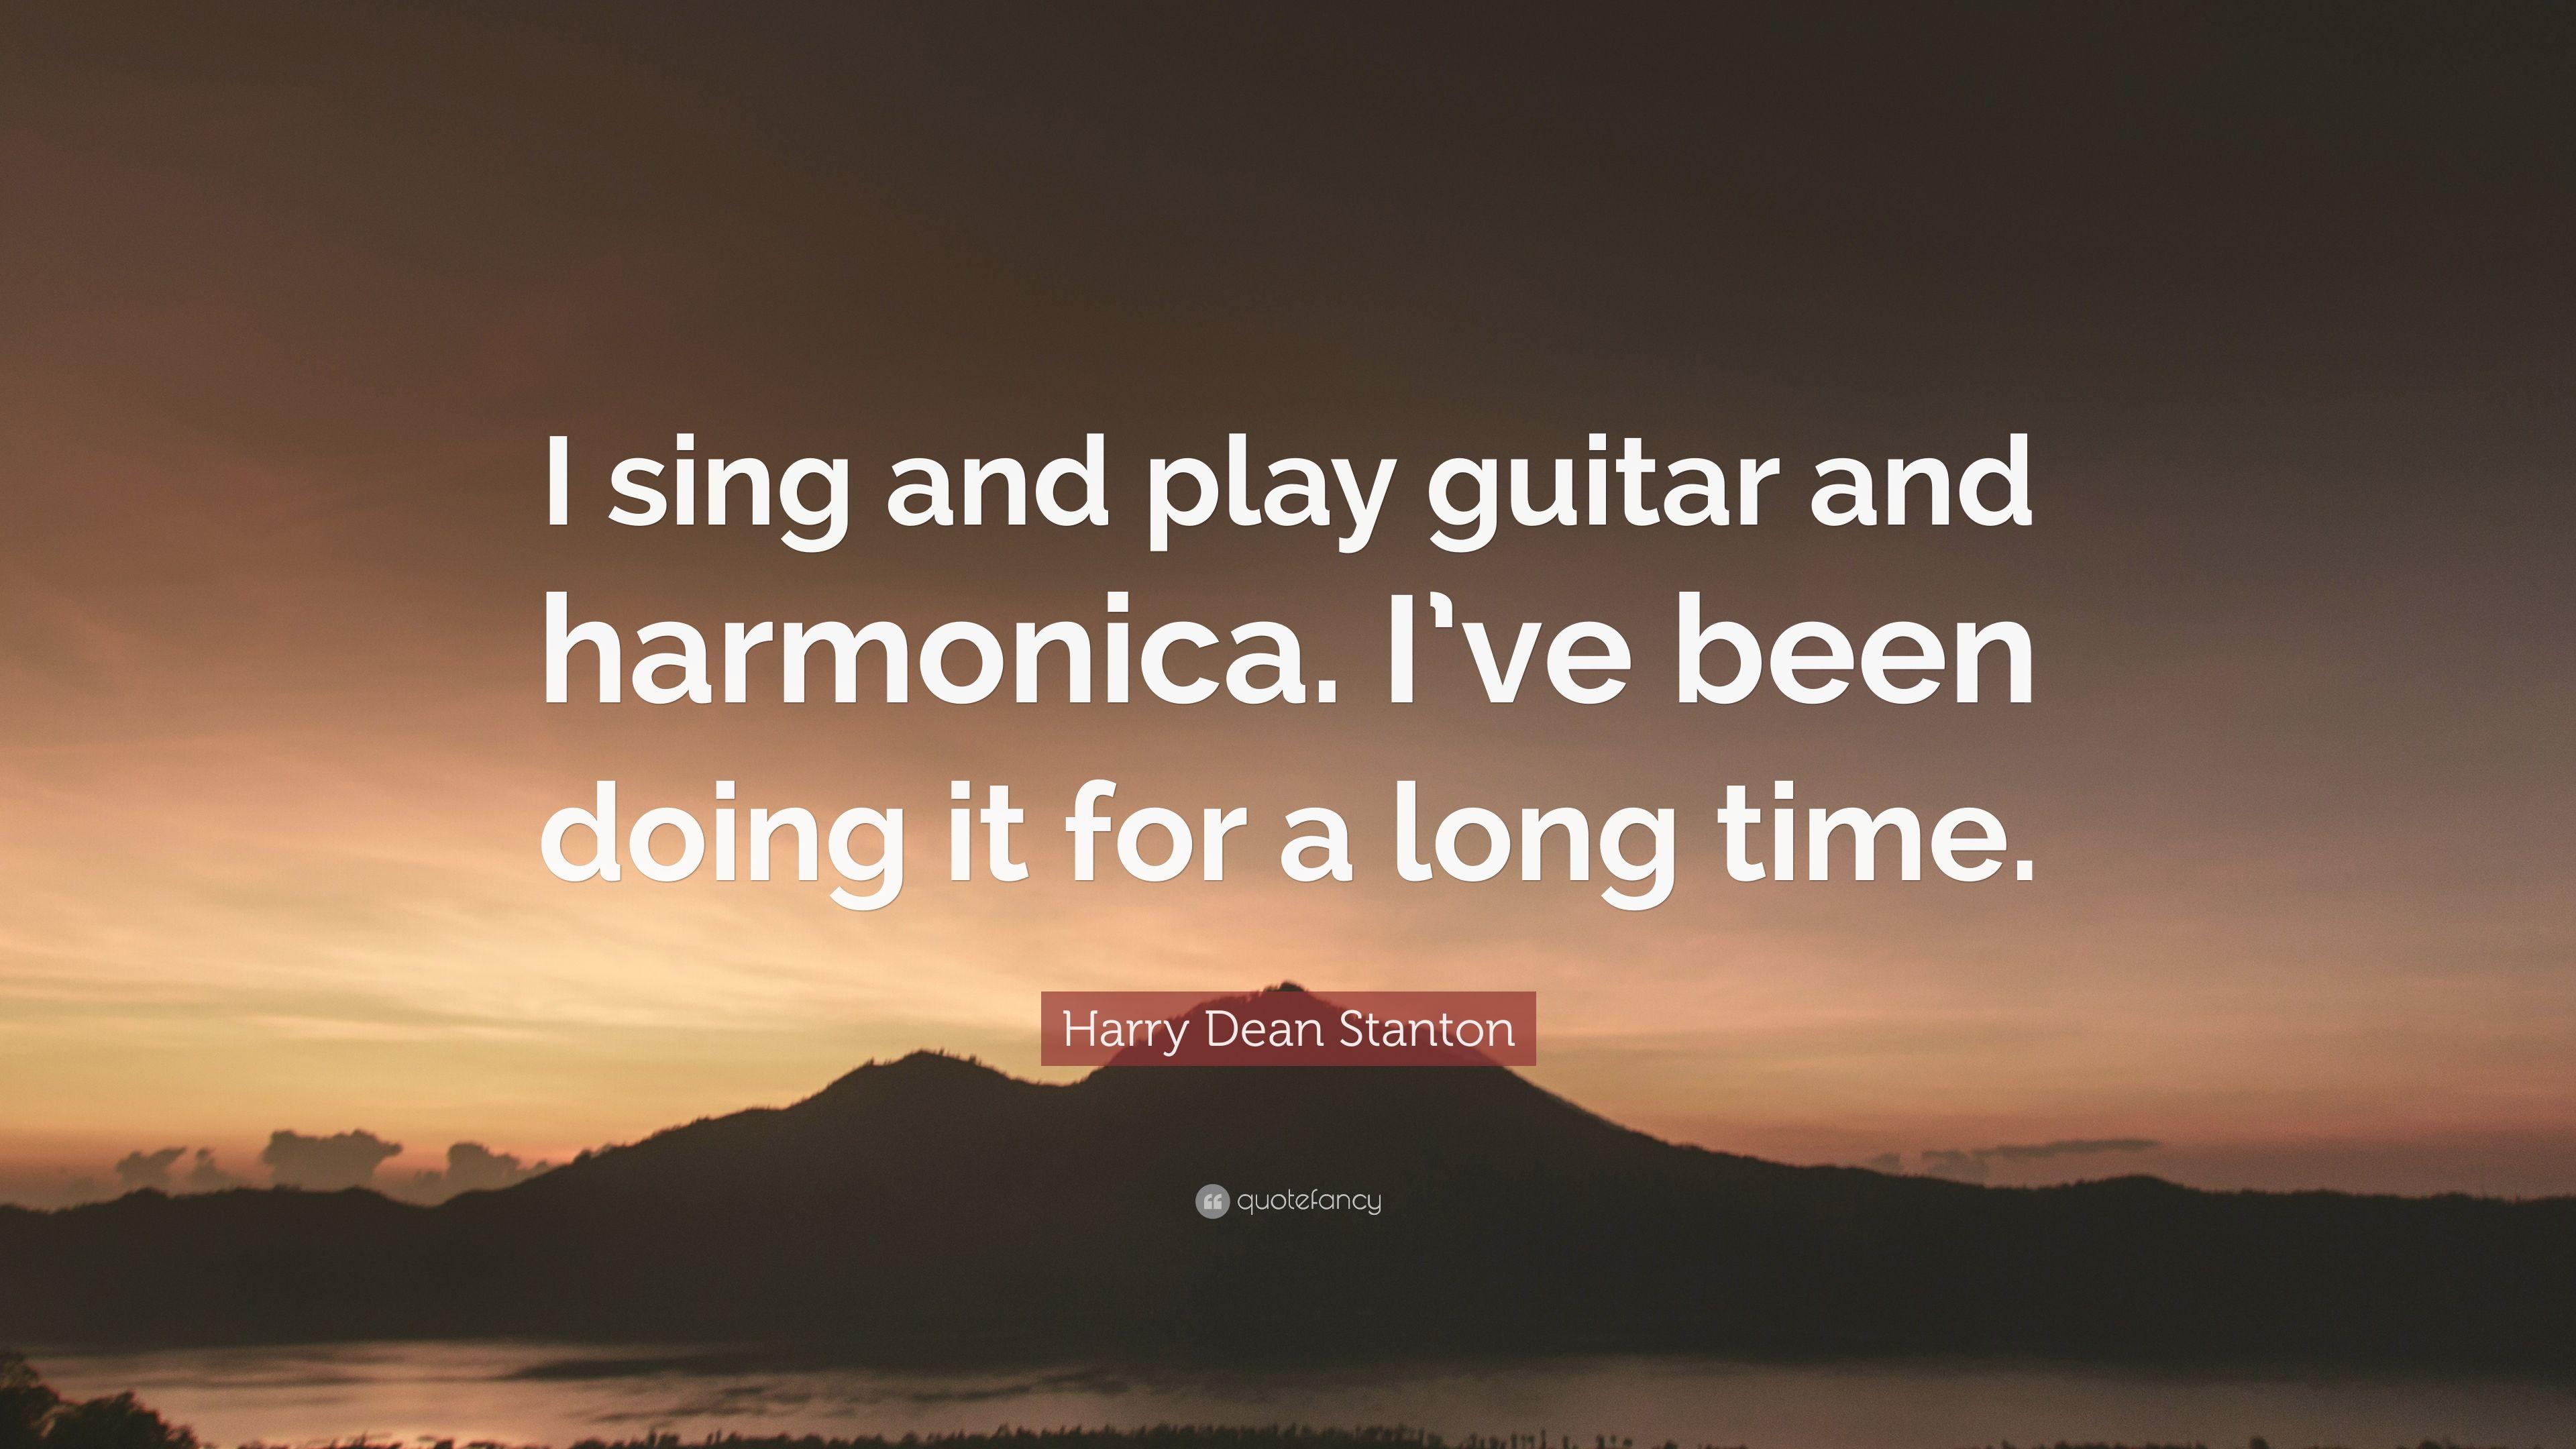 Harry Dean Stanton Quote: “I sing and play guitar and harmonica. I